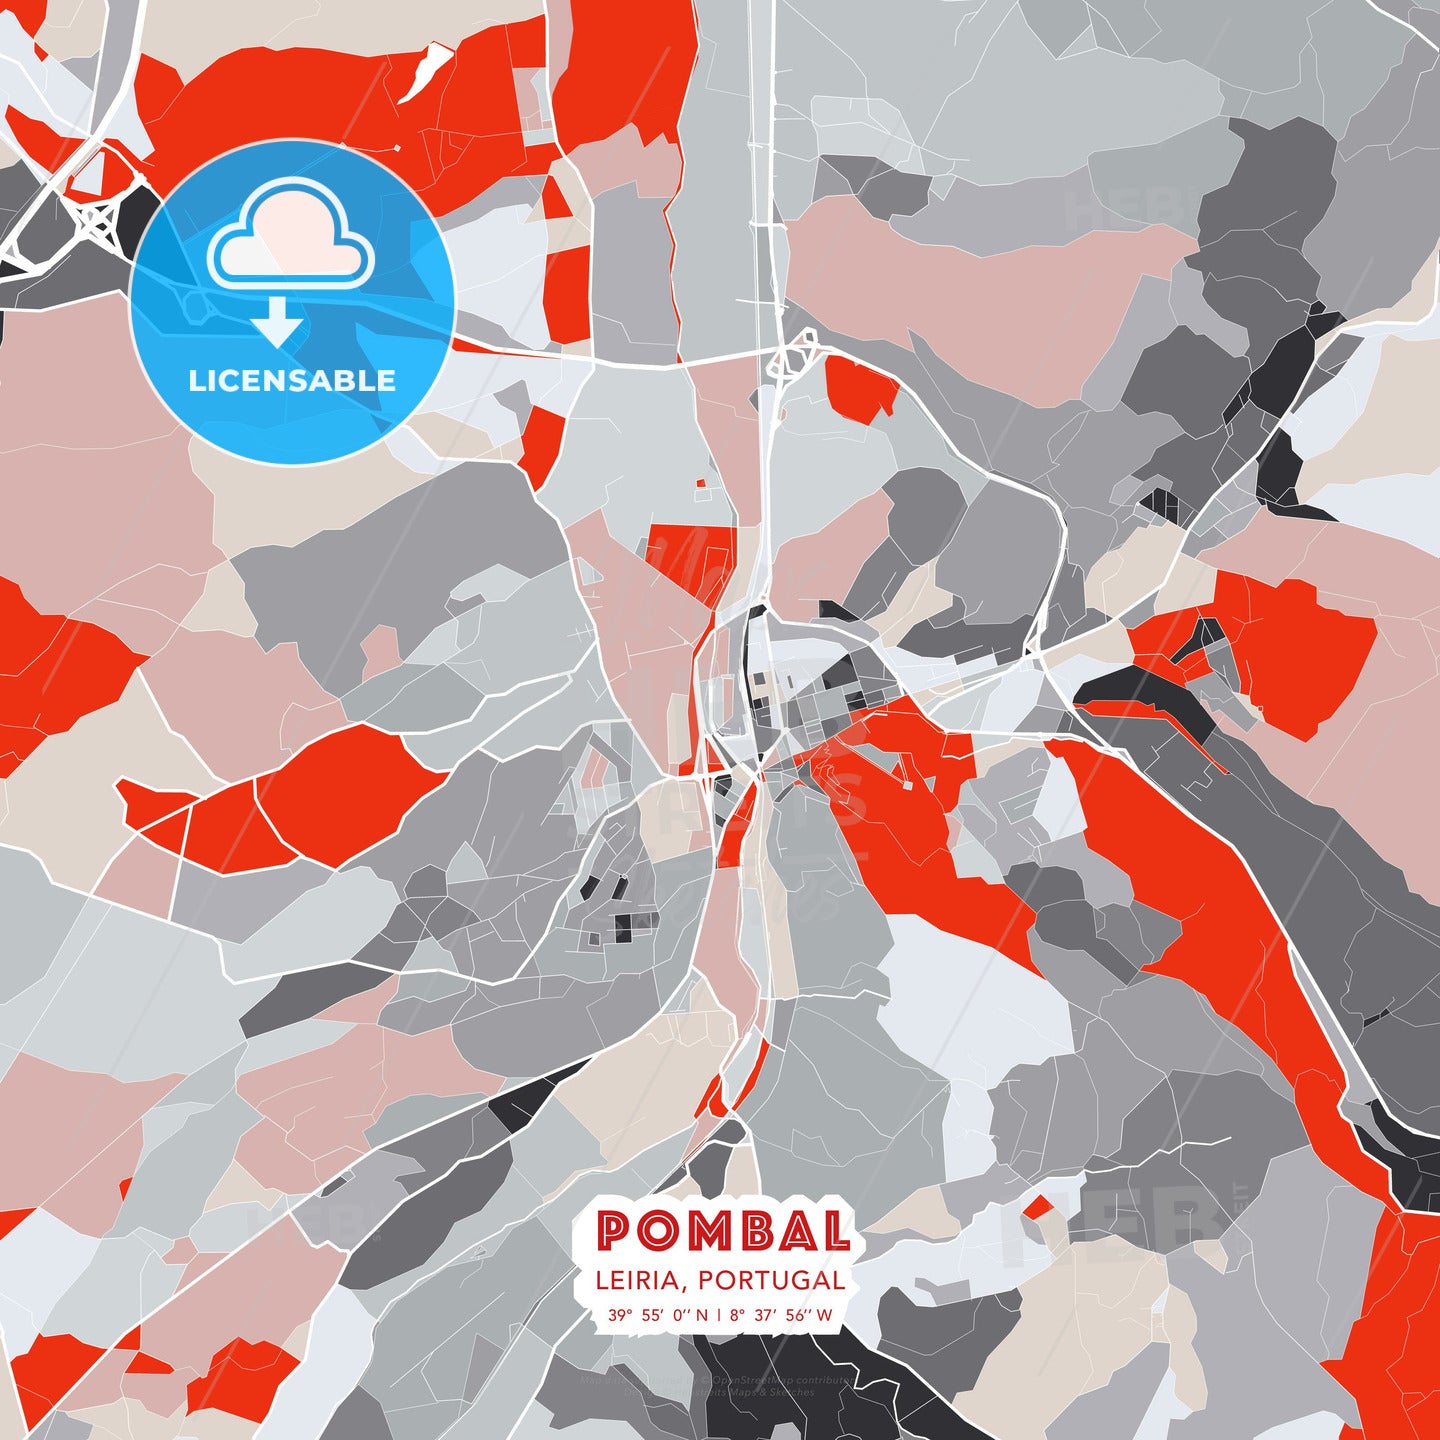 Pombal, Leiria, Portugal, modern map - HEBSTREITS Sketches